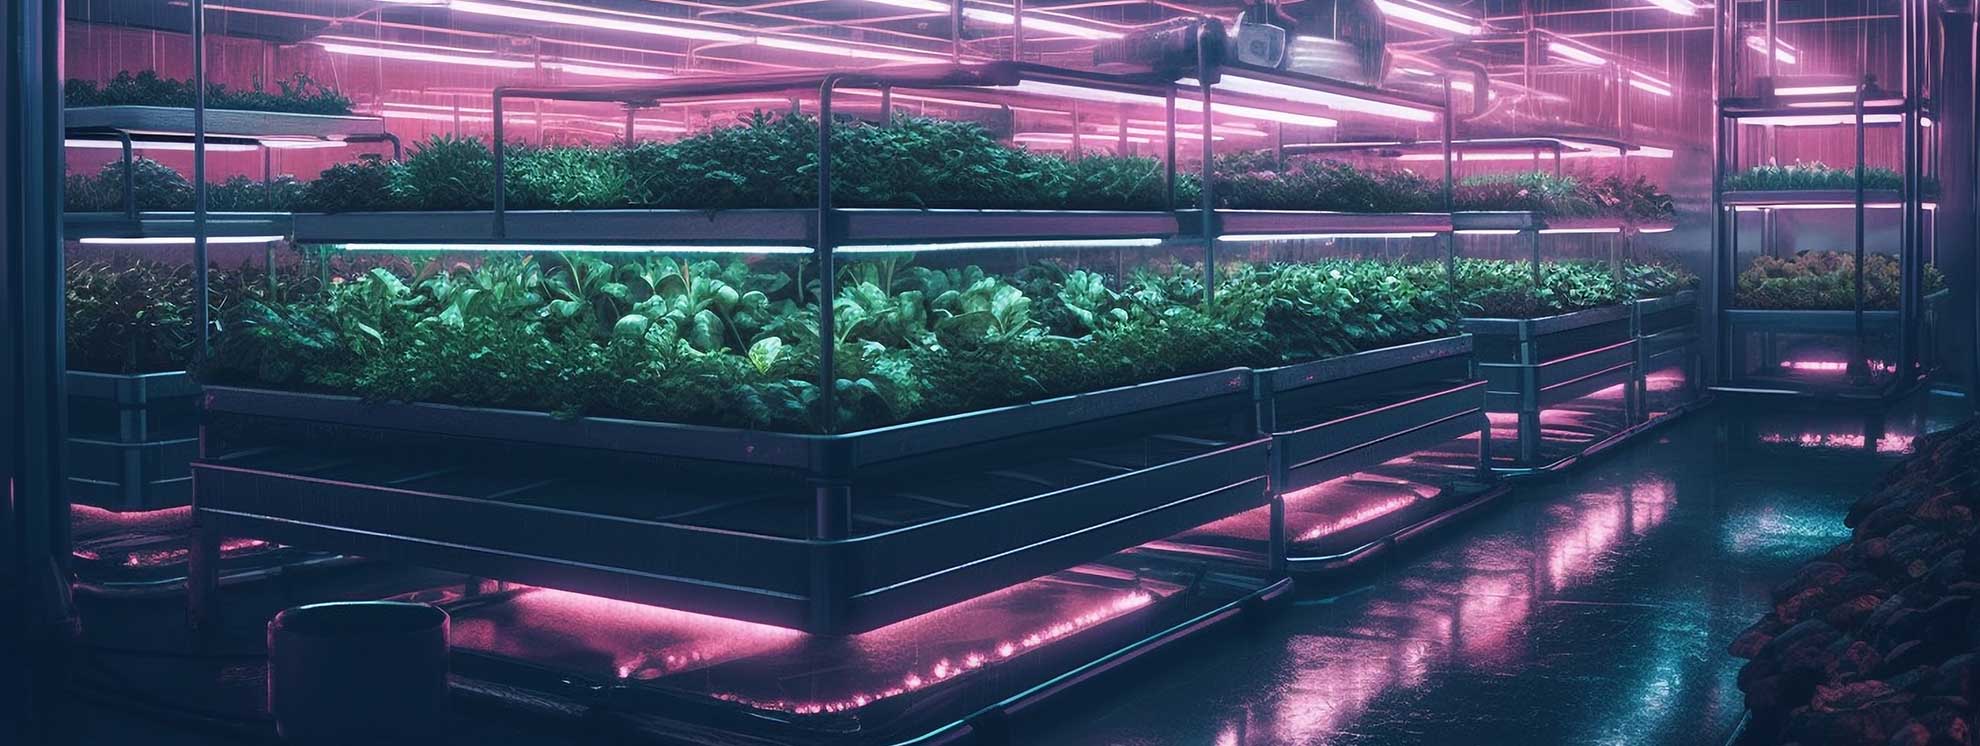 Greenlight Analytical - Vertical Farming is The Future